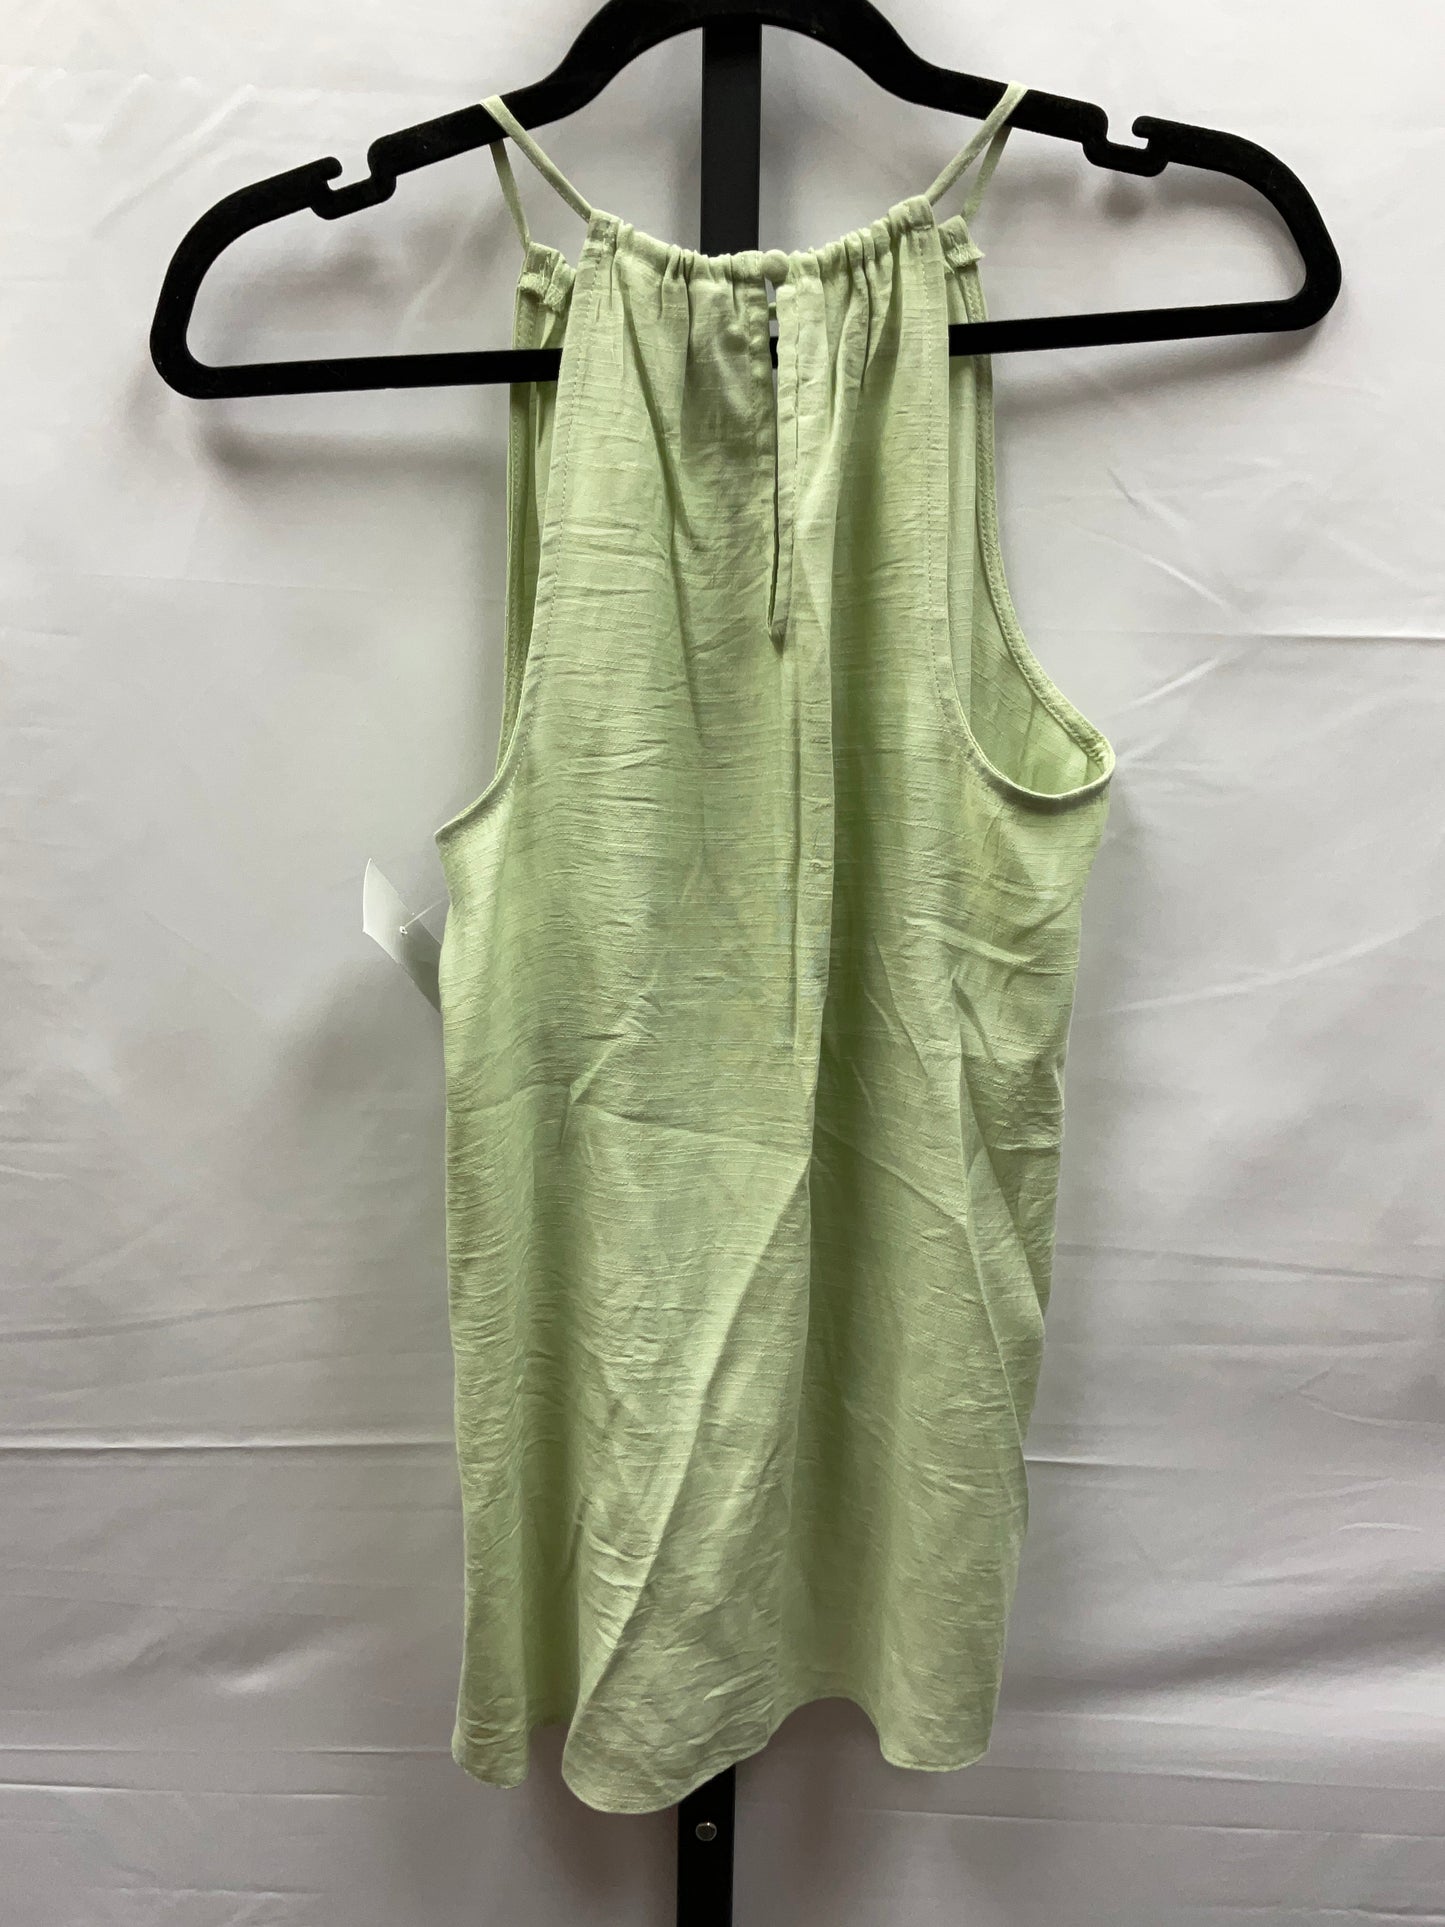 Green Top Sleeveless Nine West, Size S